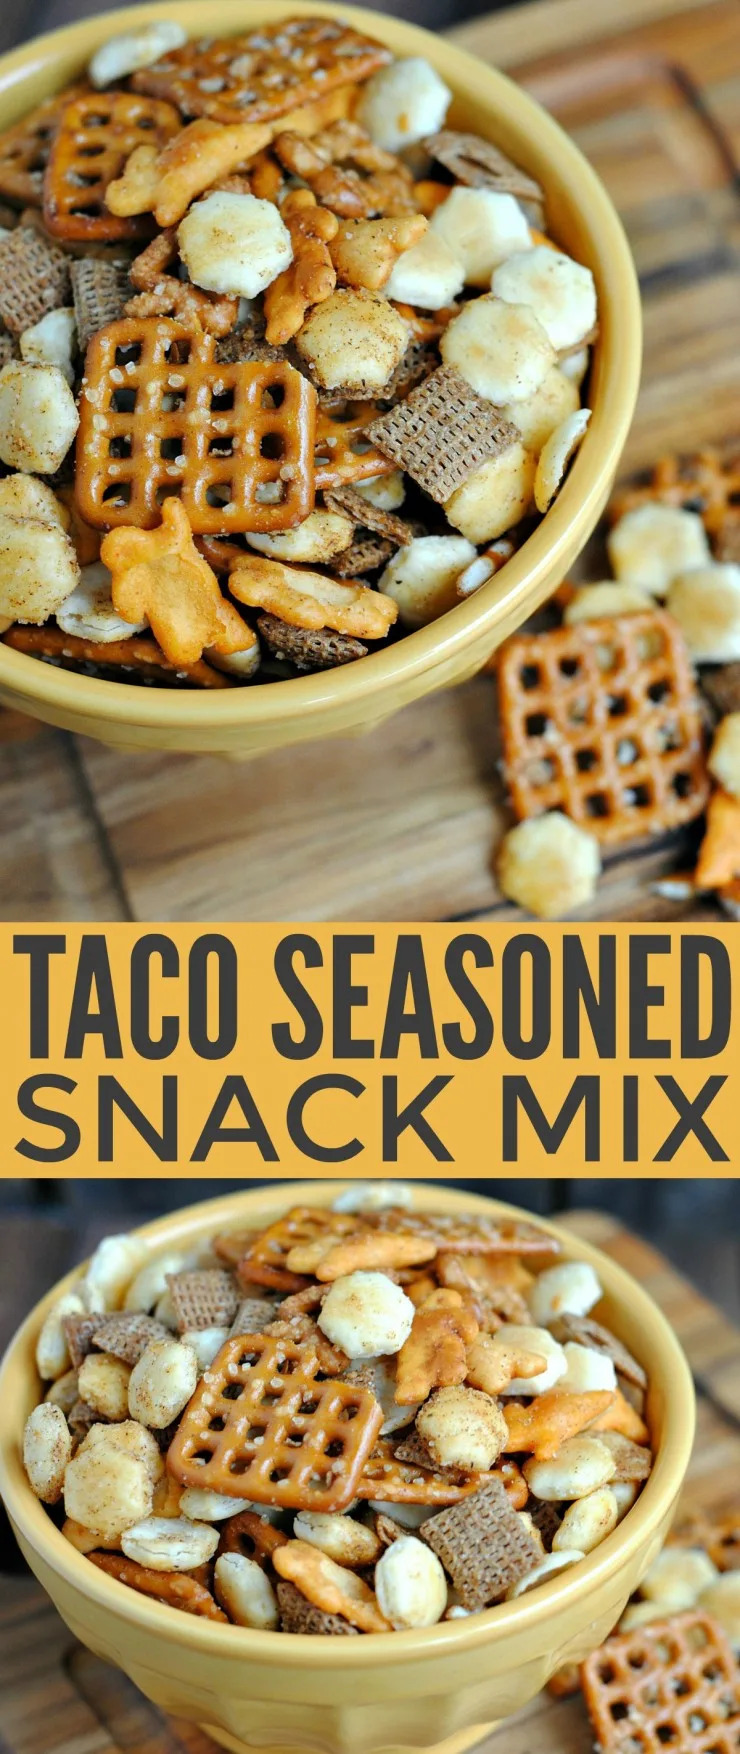 Taco Seasoned Snack Mix is a great way to make your own homemade snack mix plus the Taco Seasoning included also works great for actual tacos.